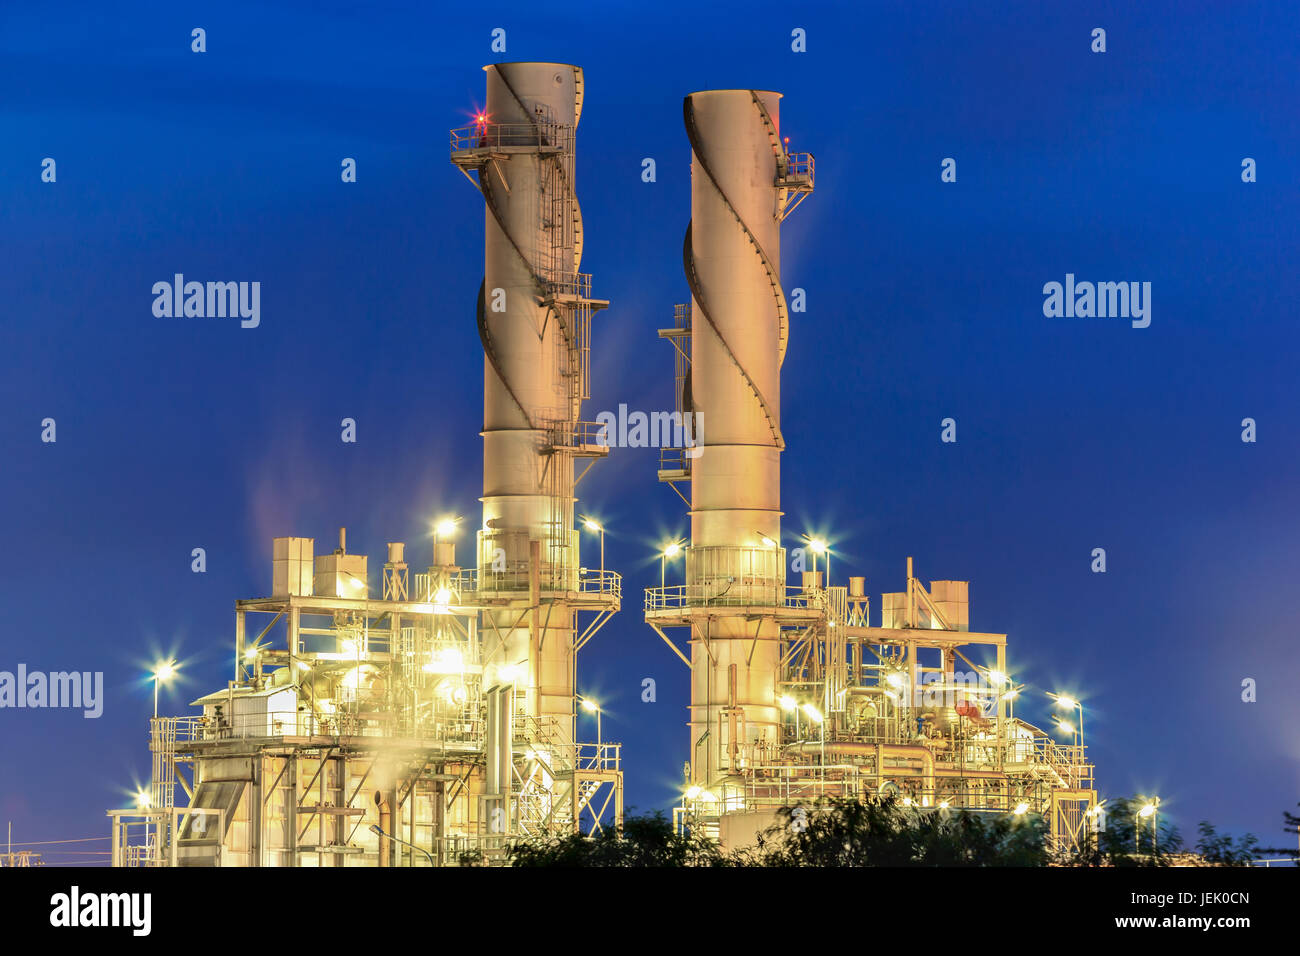 steam power plant with blue hour Stock Photo